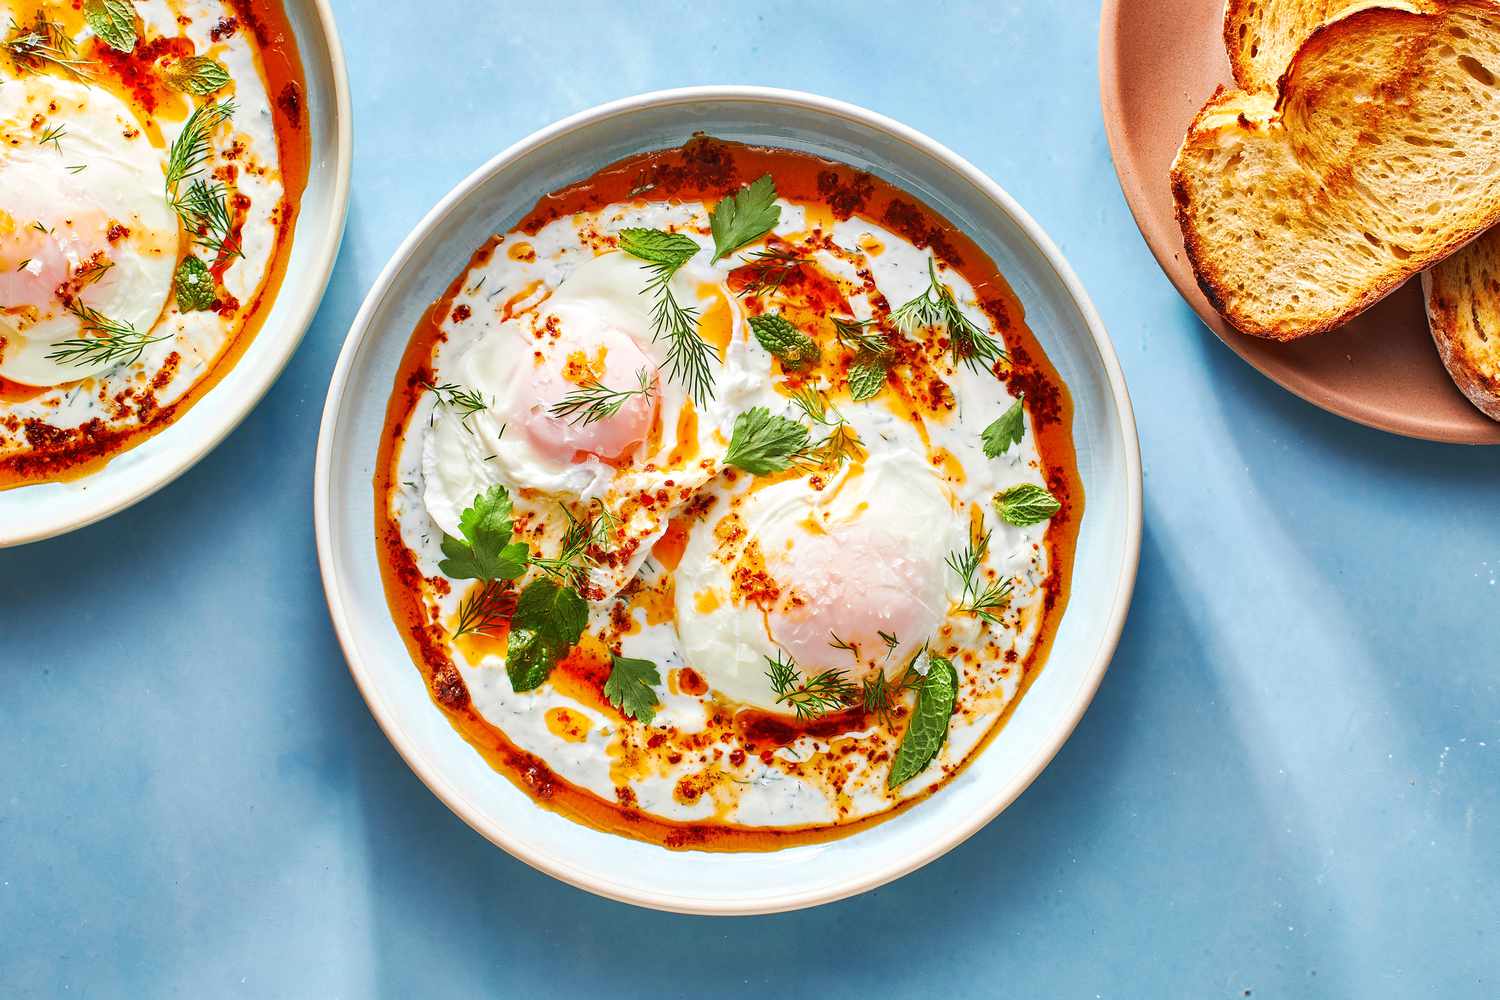 Poached eggs served with yogurt sauce, brown butter, and topped with herbs